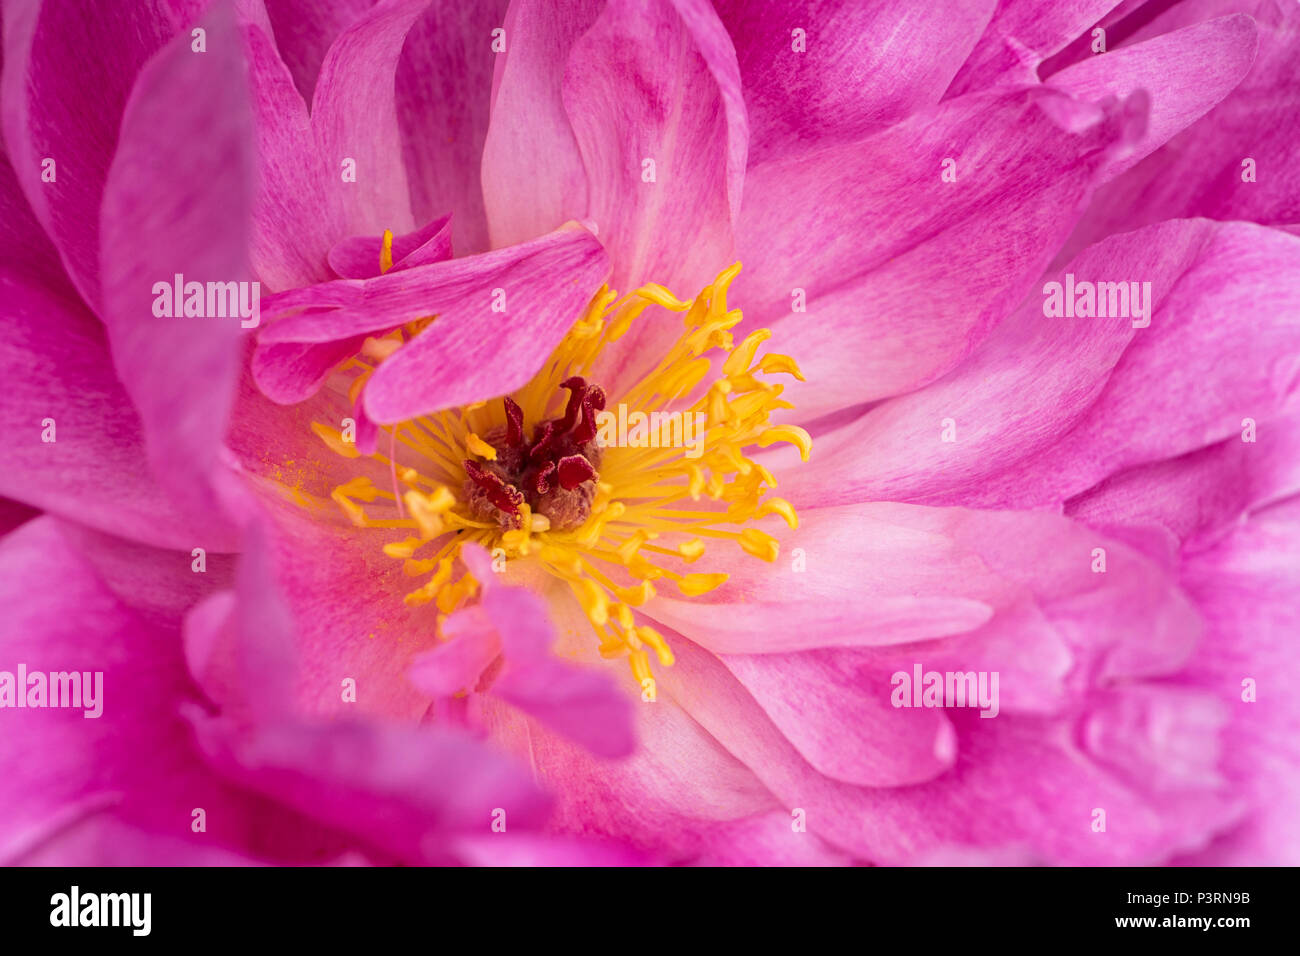 Close-up, full frame image of the beautiful summer flowering Pink Peony flower Stock Photo